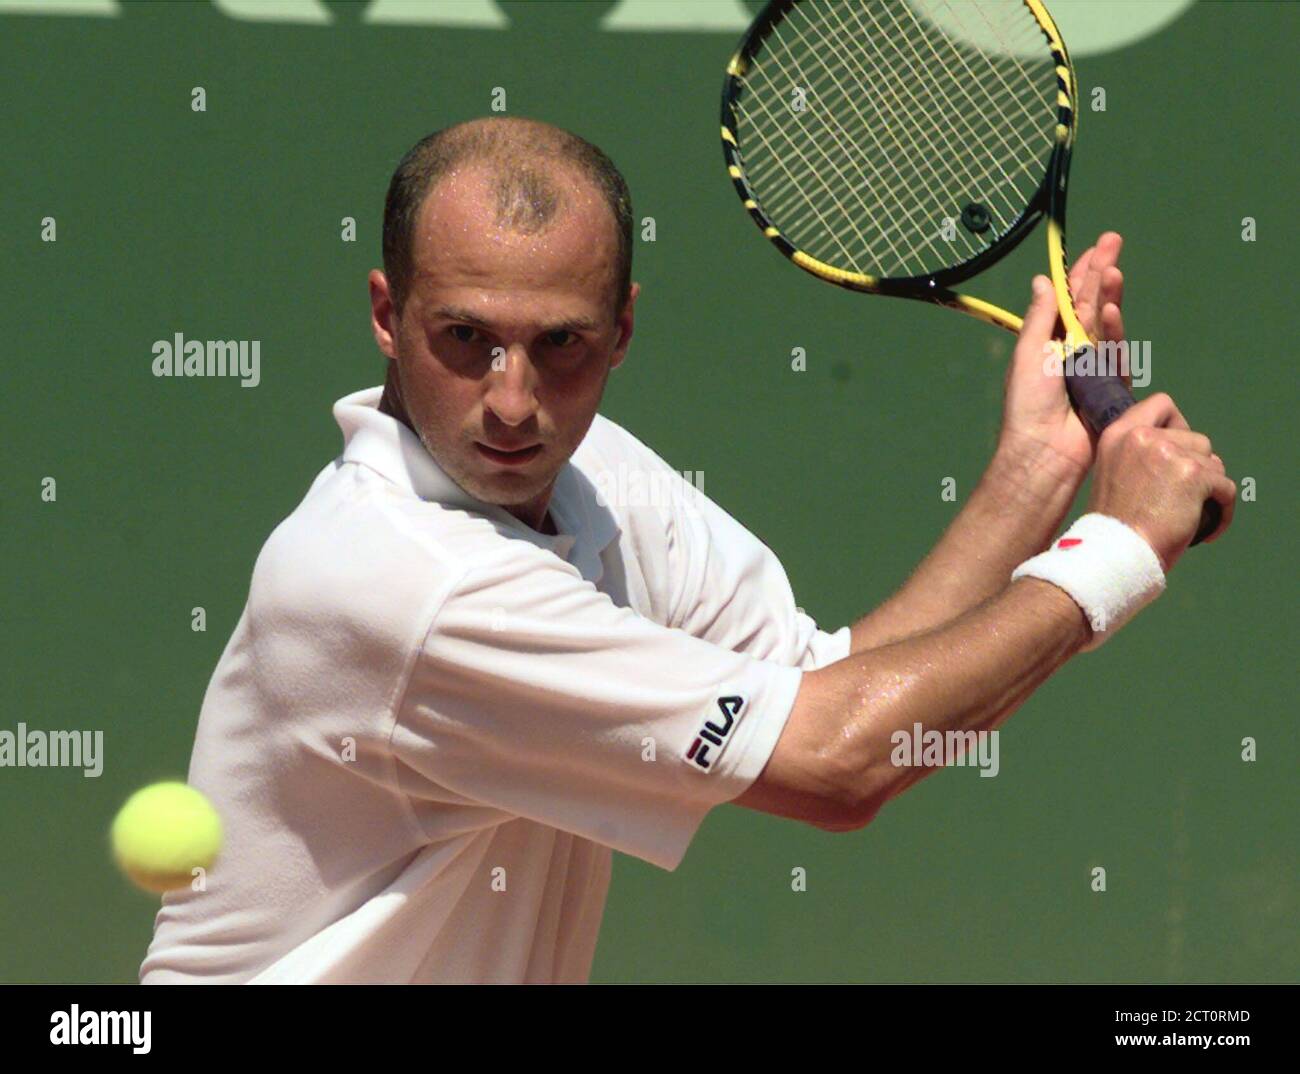 Ukrainian Andrei Medvedev returns a ball to Spain's Felix Mantilla at the  Estoril Open April 7. Medvedev lost the match 3-6 2-6. LO/AA Stock Photo -  Alamy